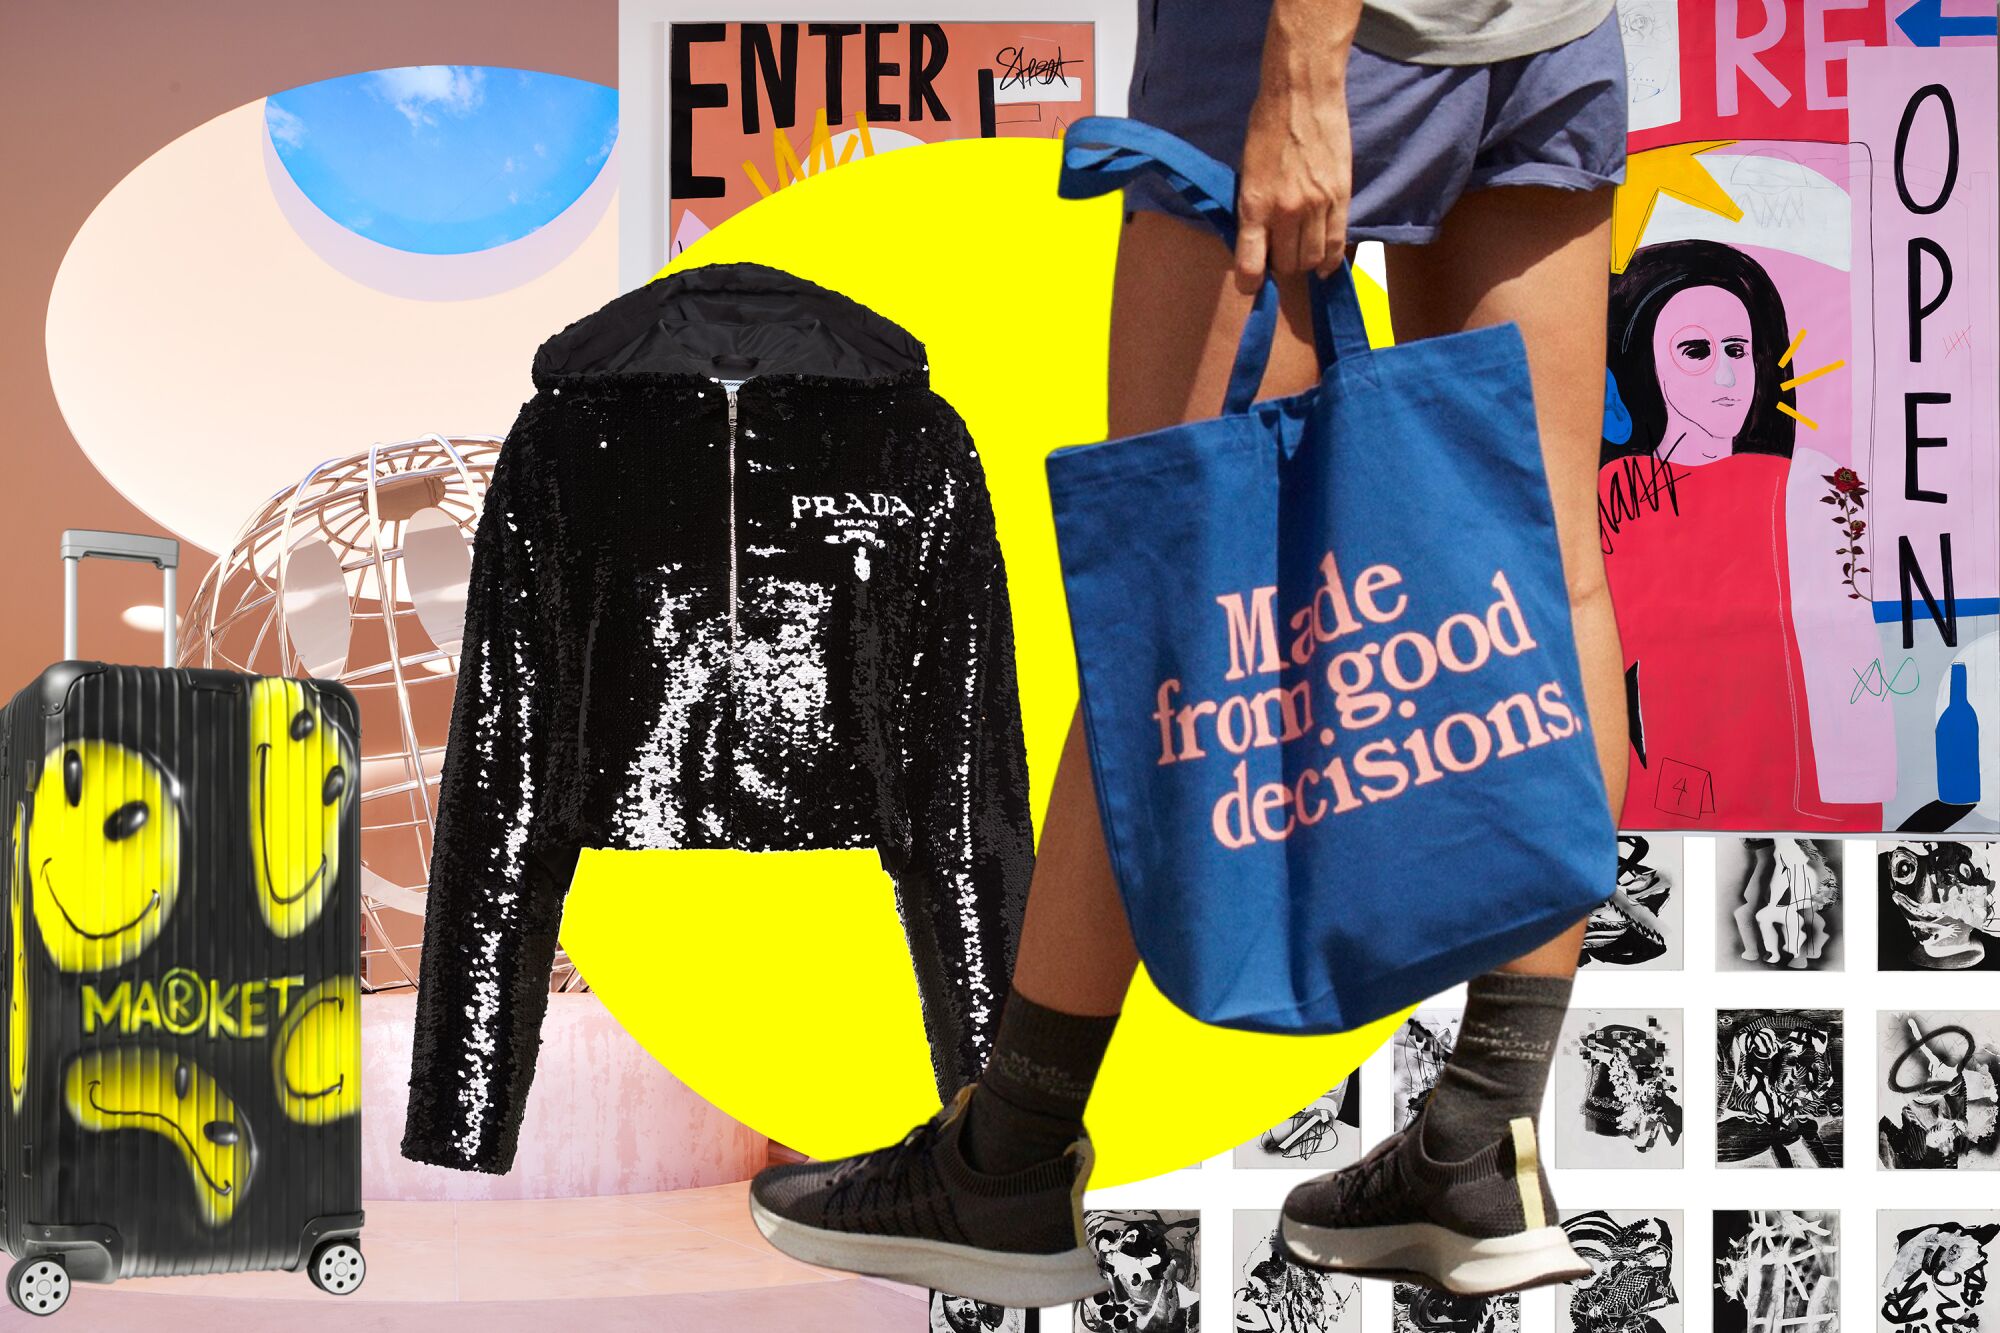 Photo collage featuring a prada black jacket, a tote bag that says "Made from good decisions" and other images